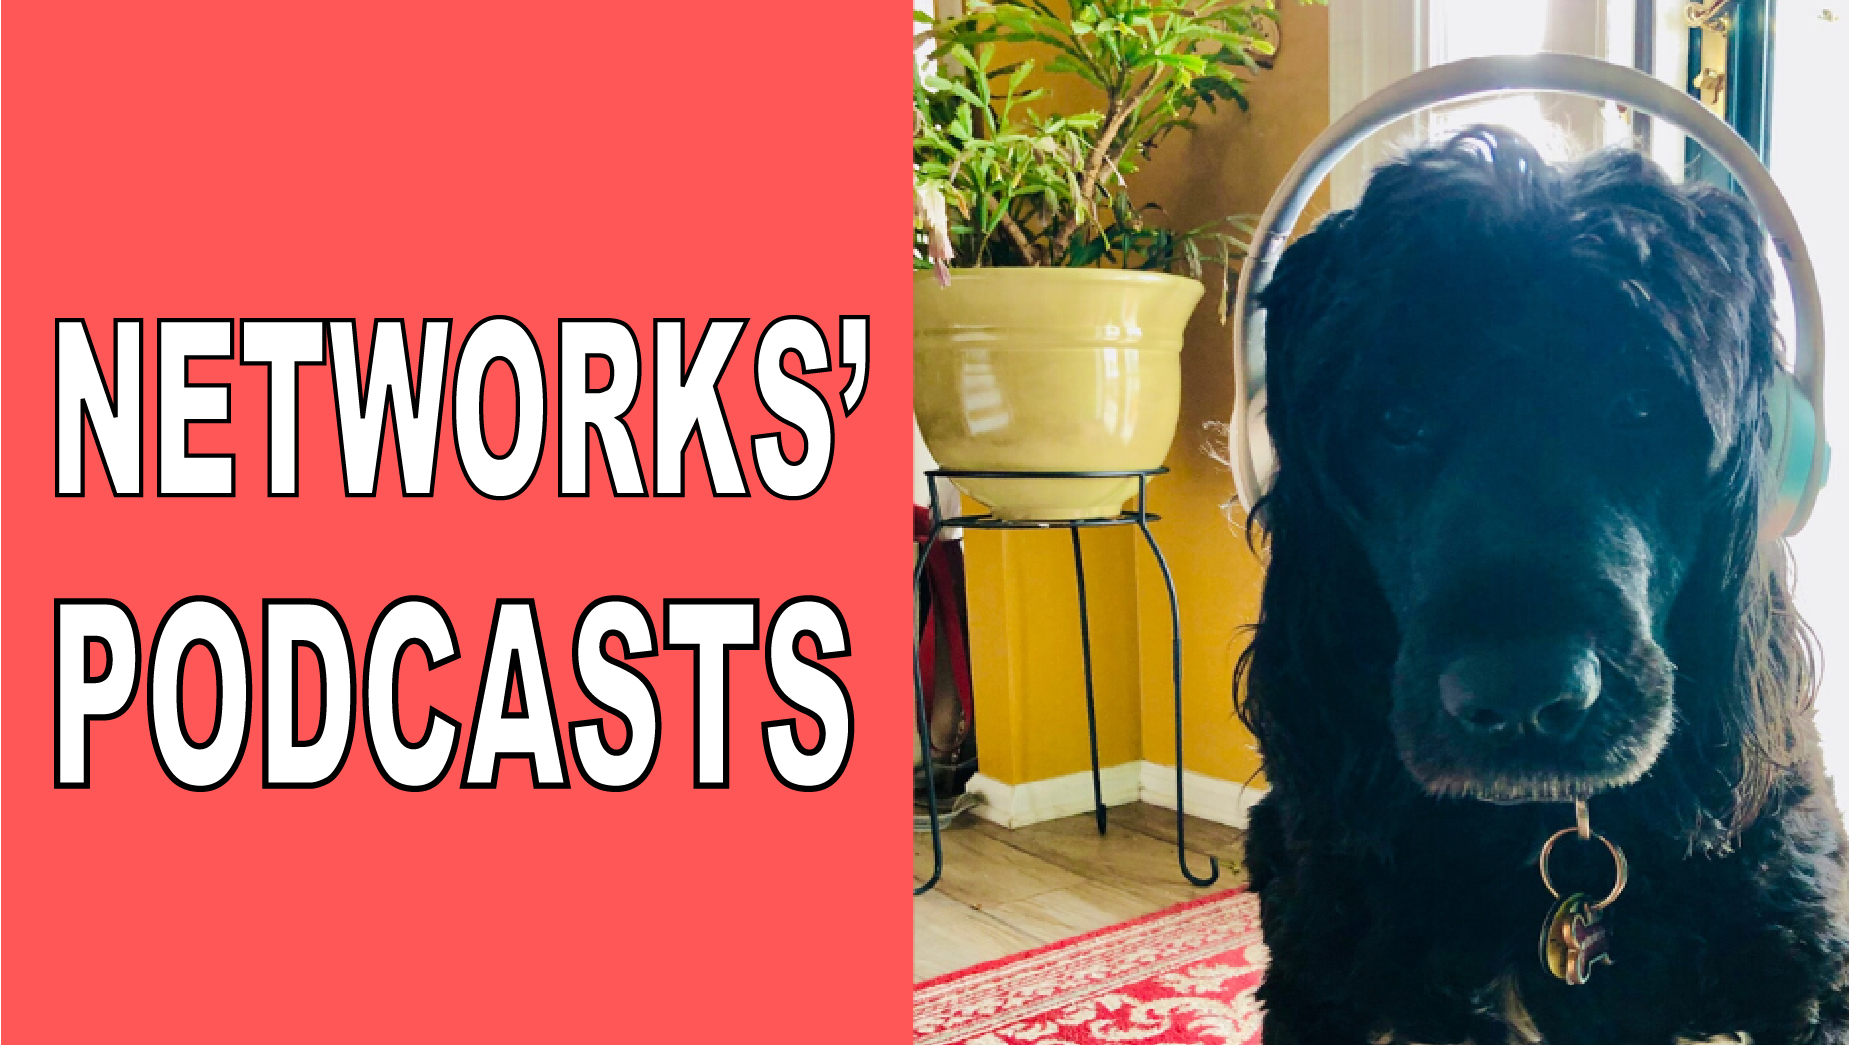 Networks' Podcasts